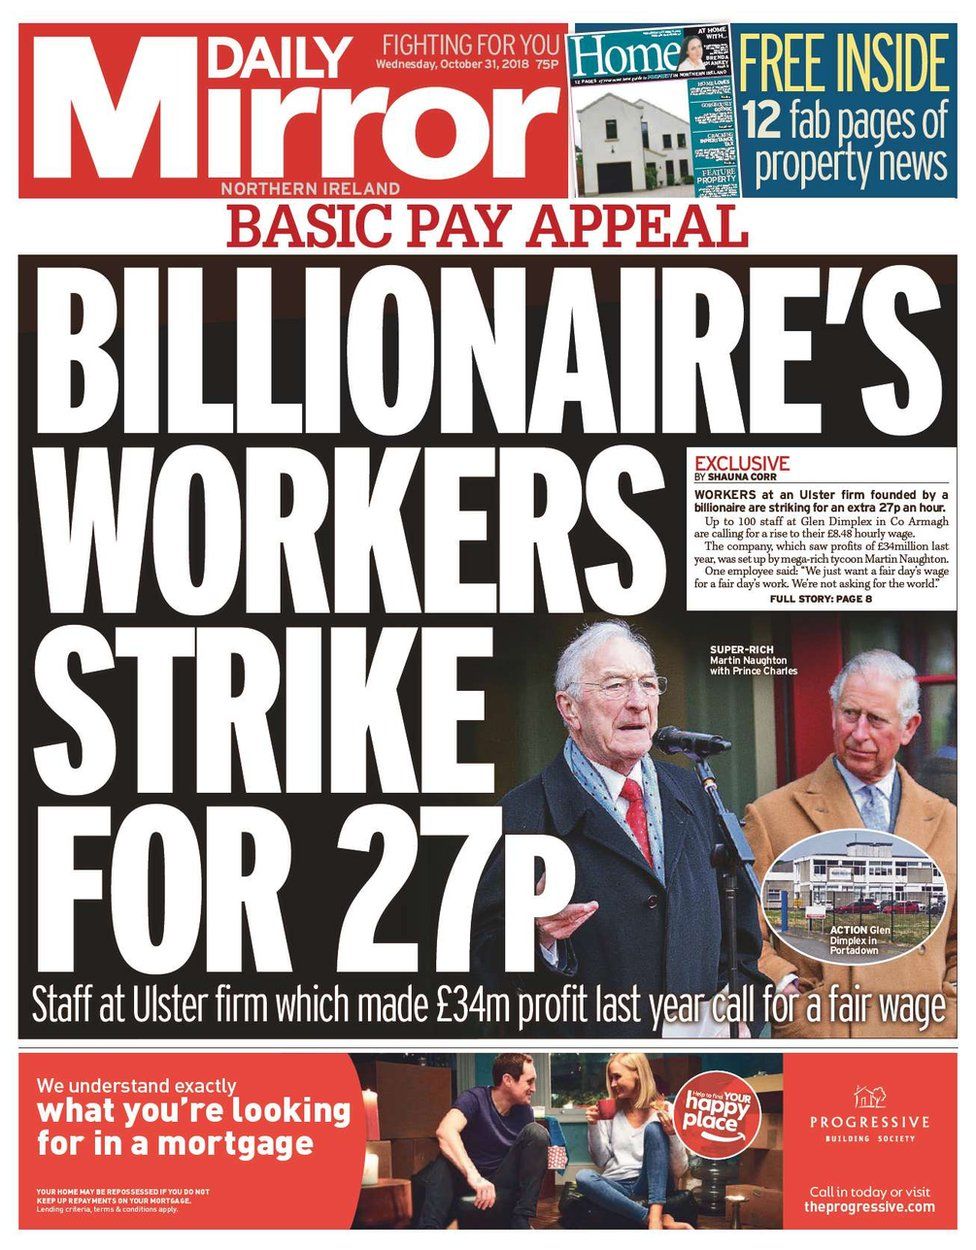 Front page of the Daily Mirror